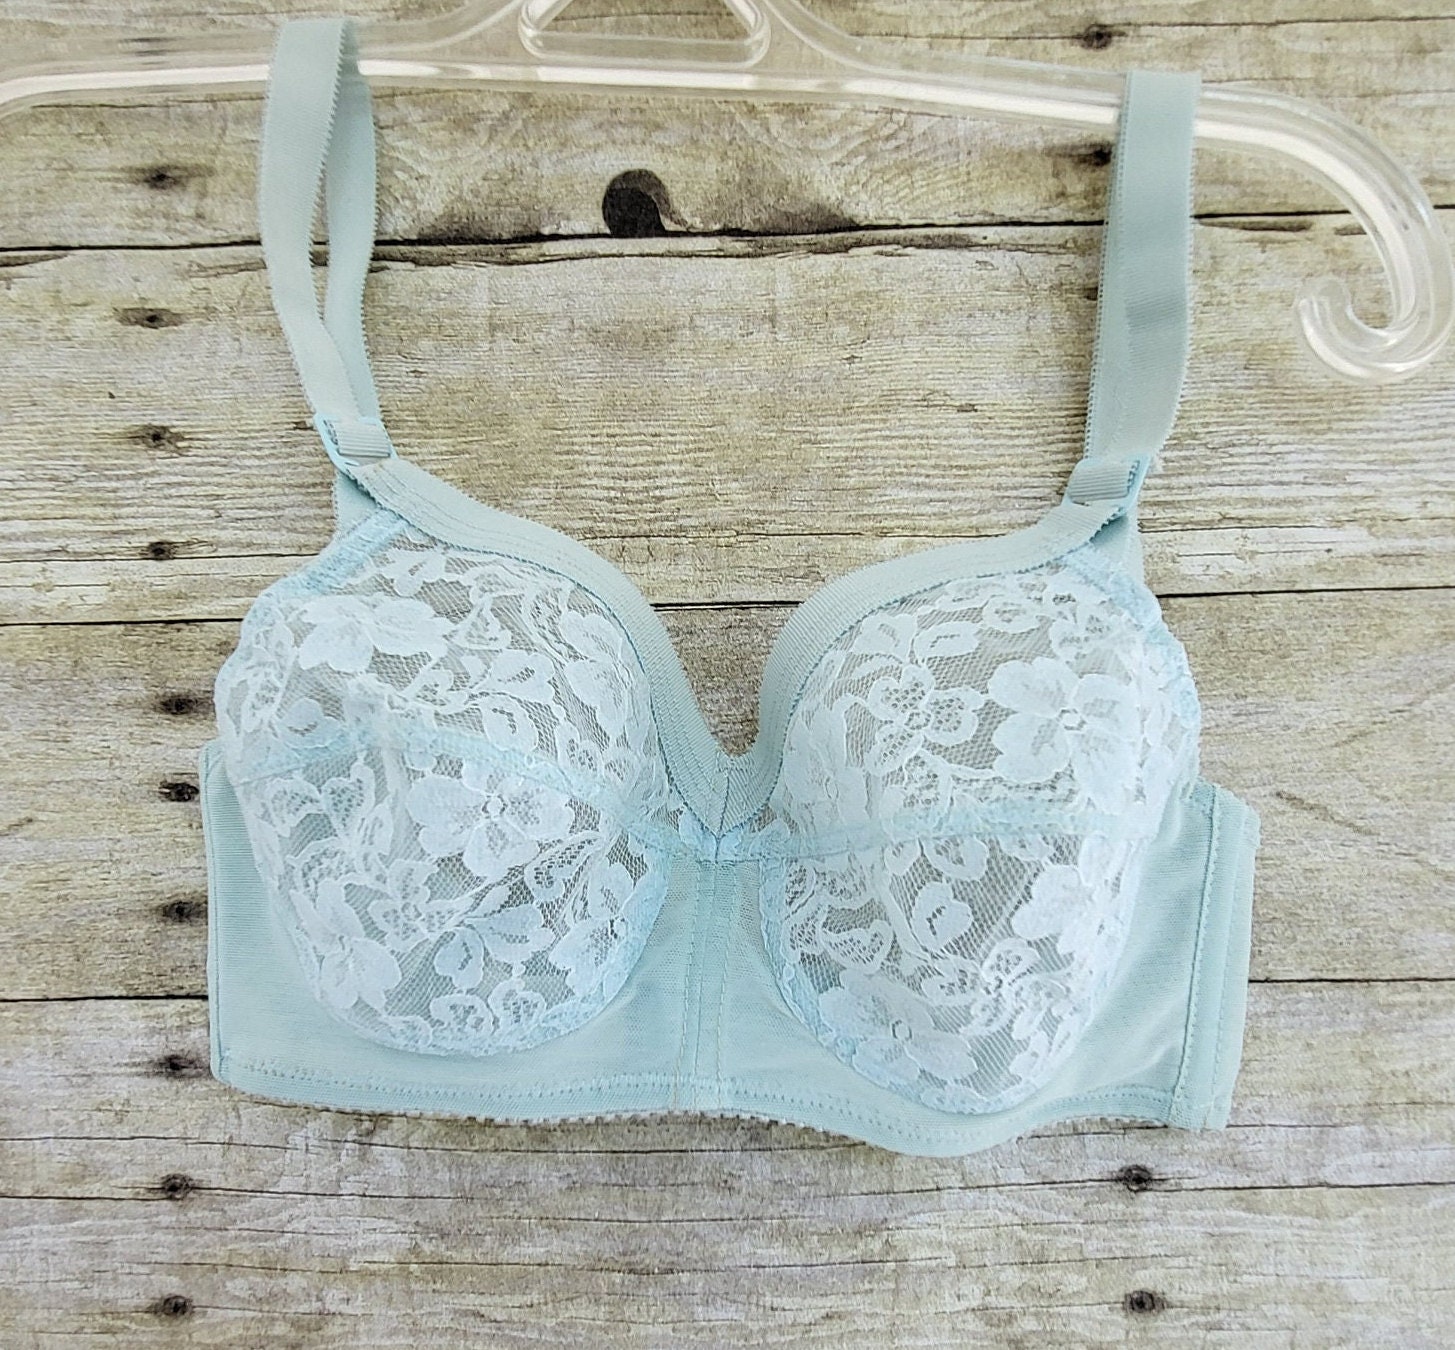 Buy A-GG Pastel Blue Recycled Lace Full Cup Non Padded Bra - 32B